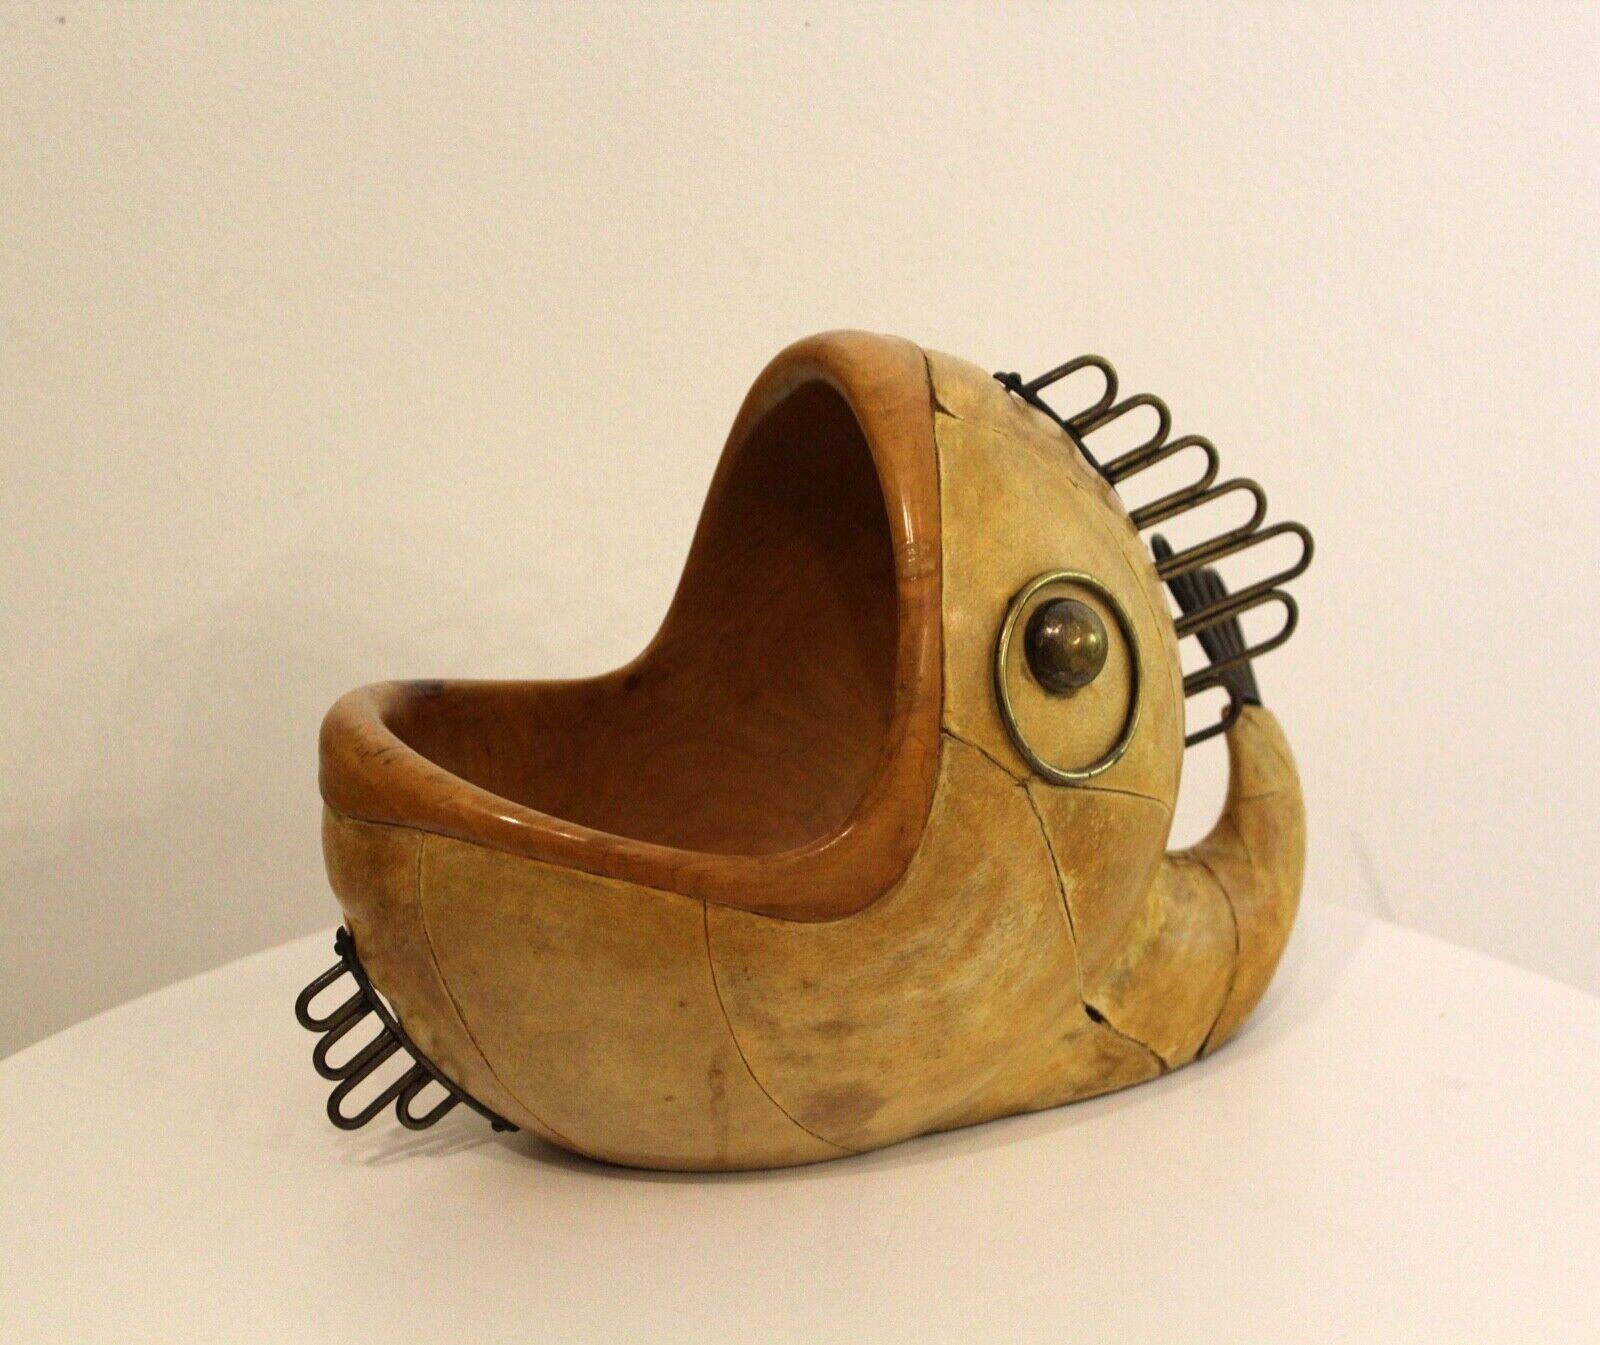 For your consideration is this unusual Aldo Tura fish-form sculpture bowl mixed media sculpture with a wood base and metal accents. Dimensions: 7